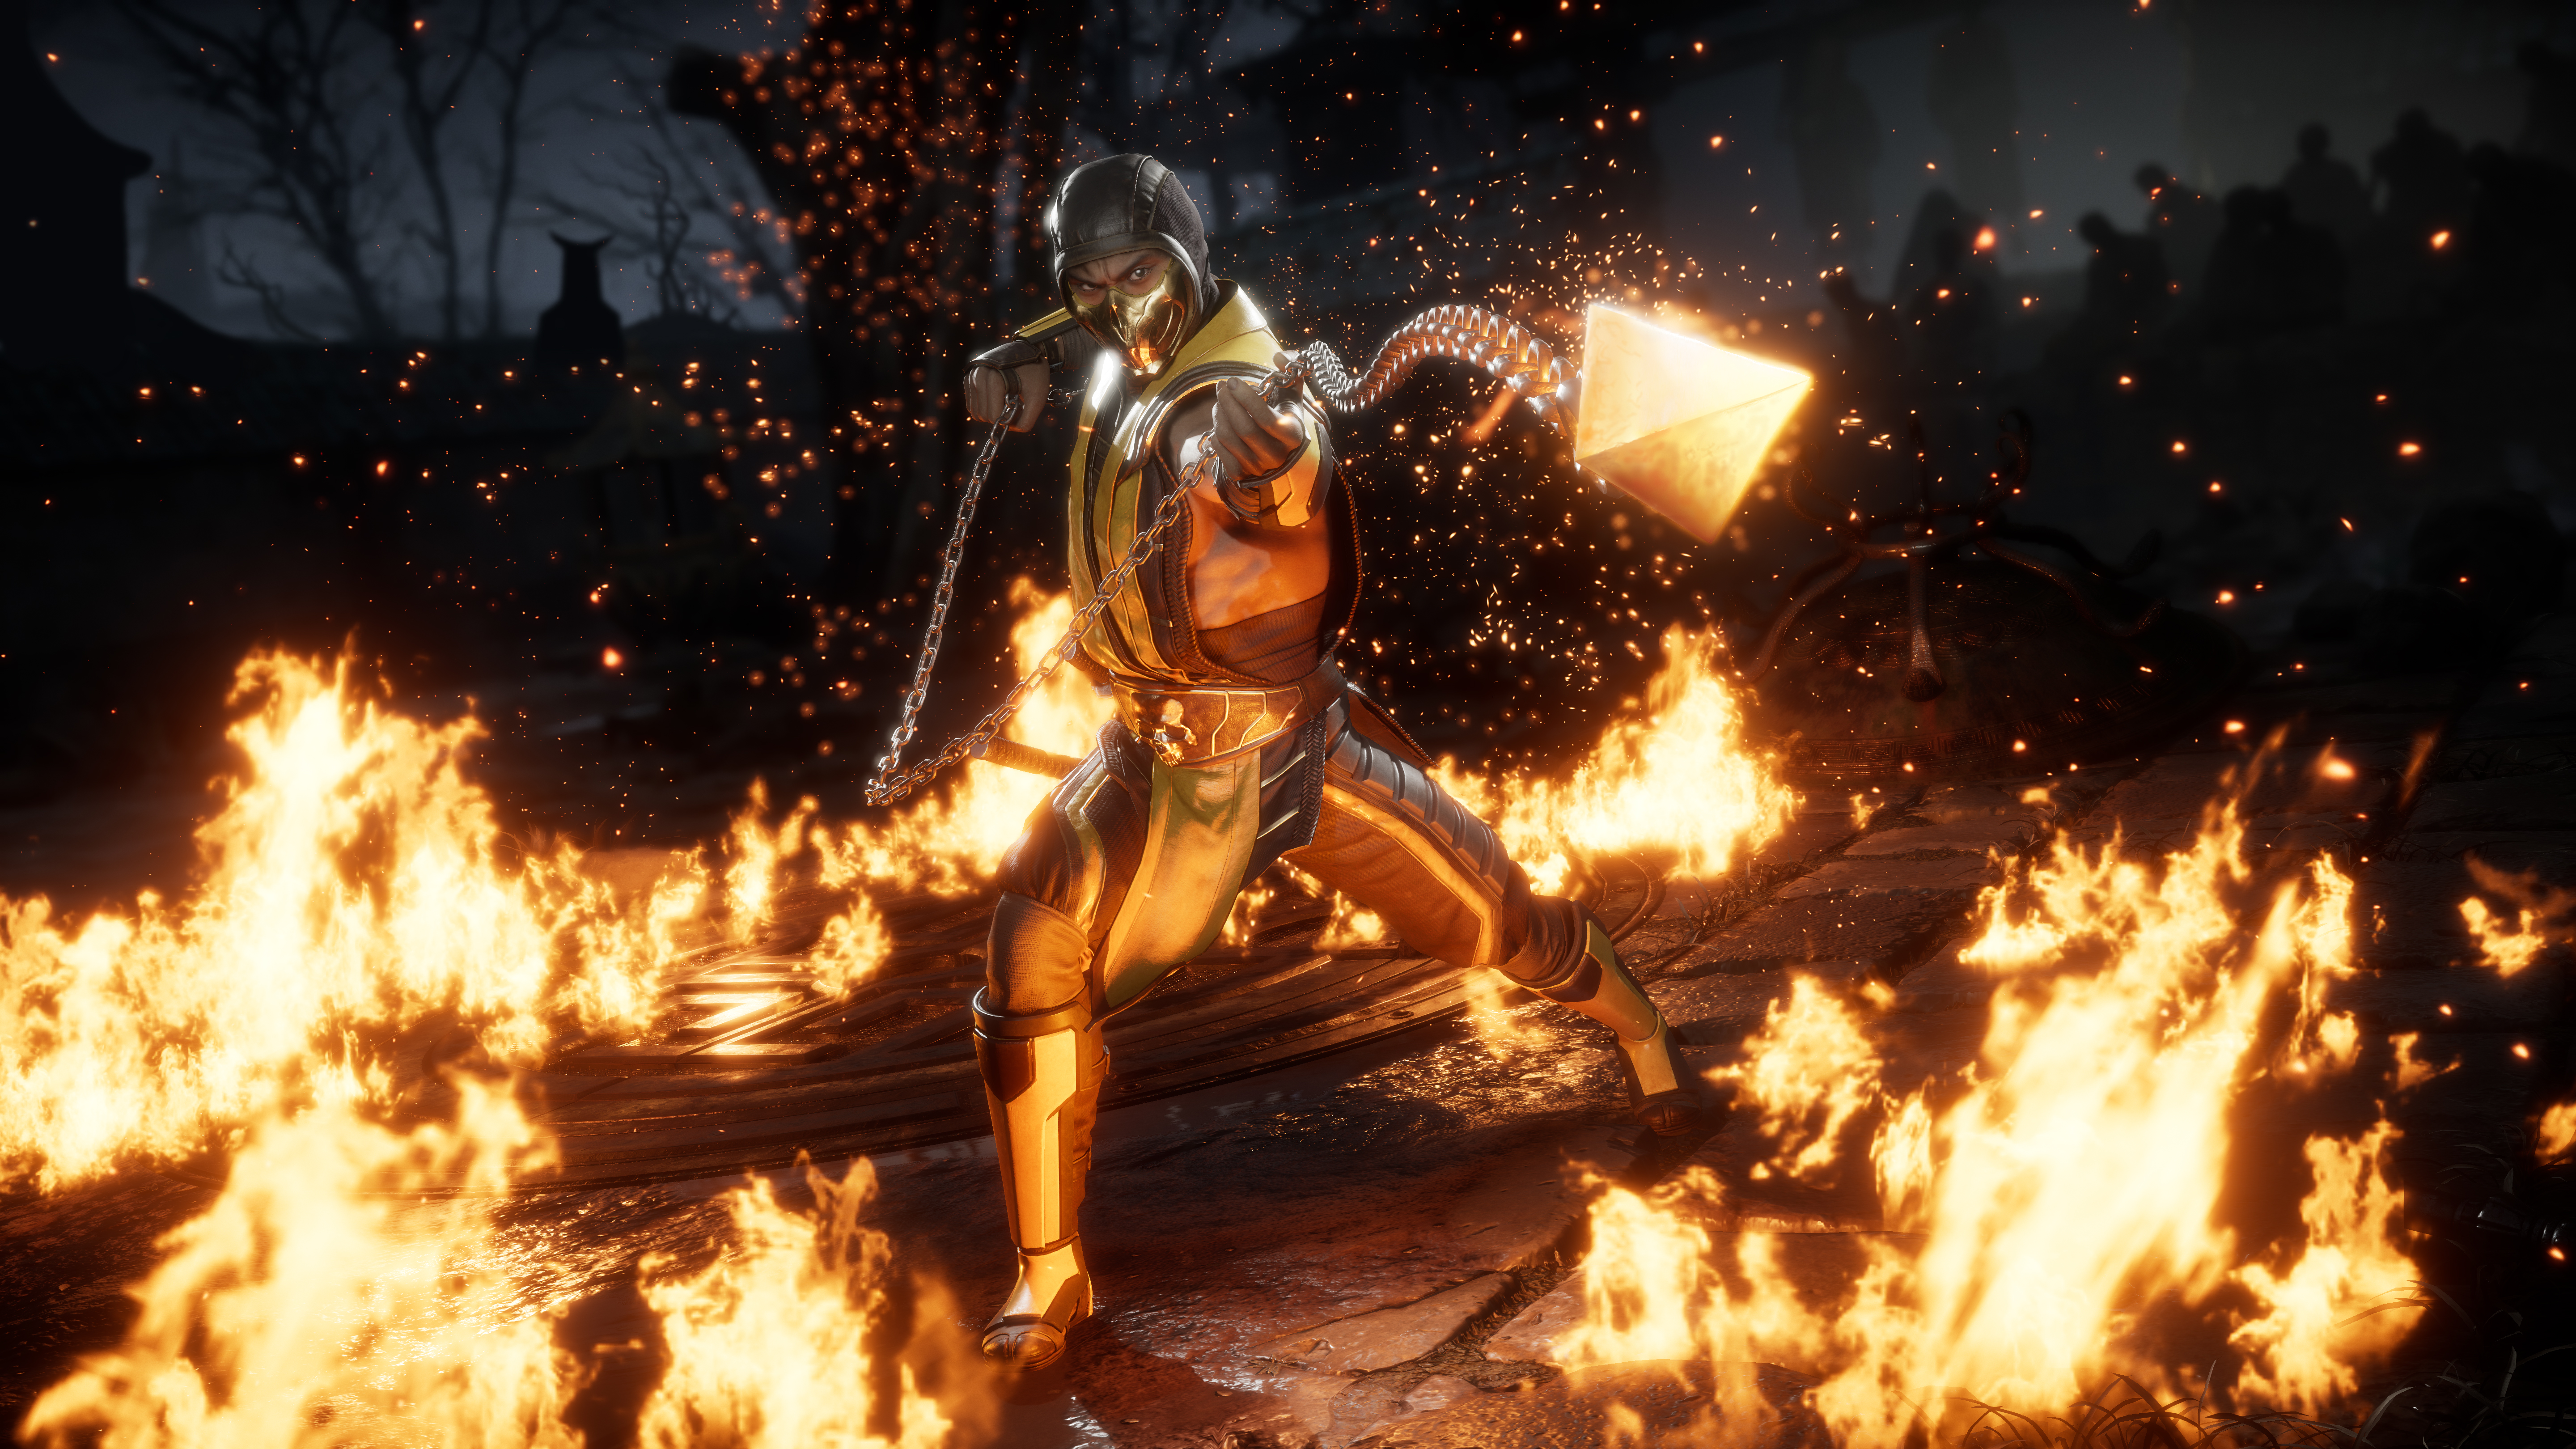 Mortal Kombat 12's Release Date Potentially Revealed In New Teaser